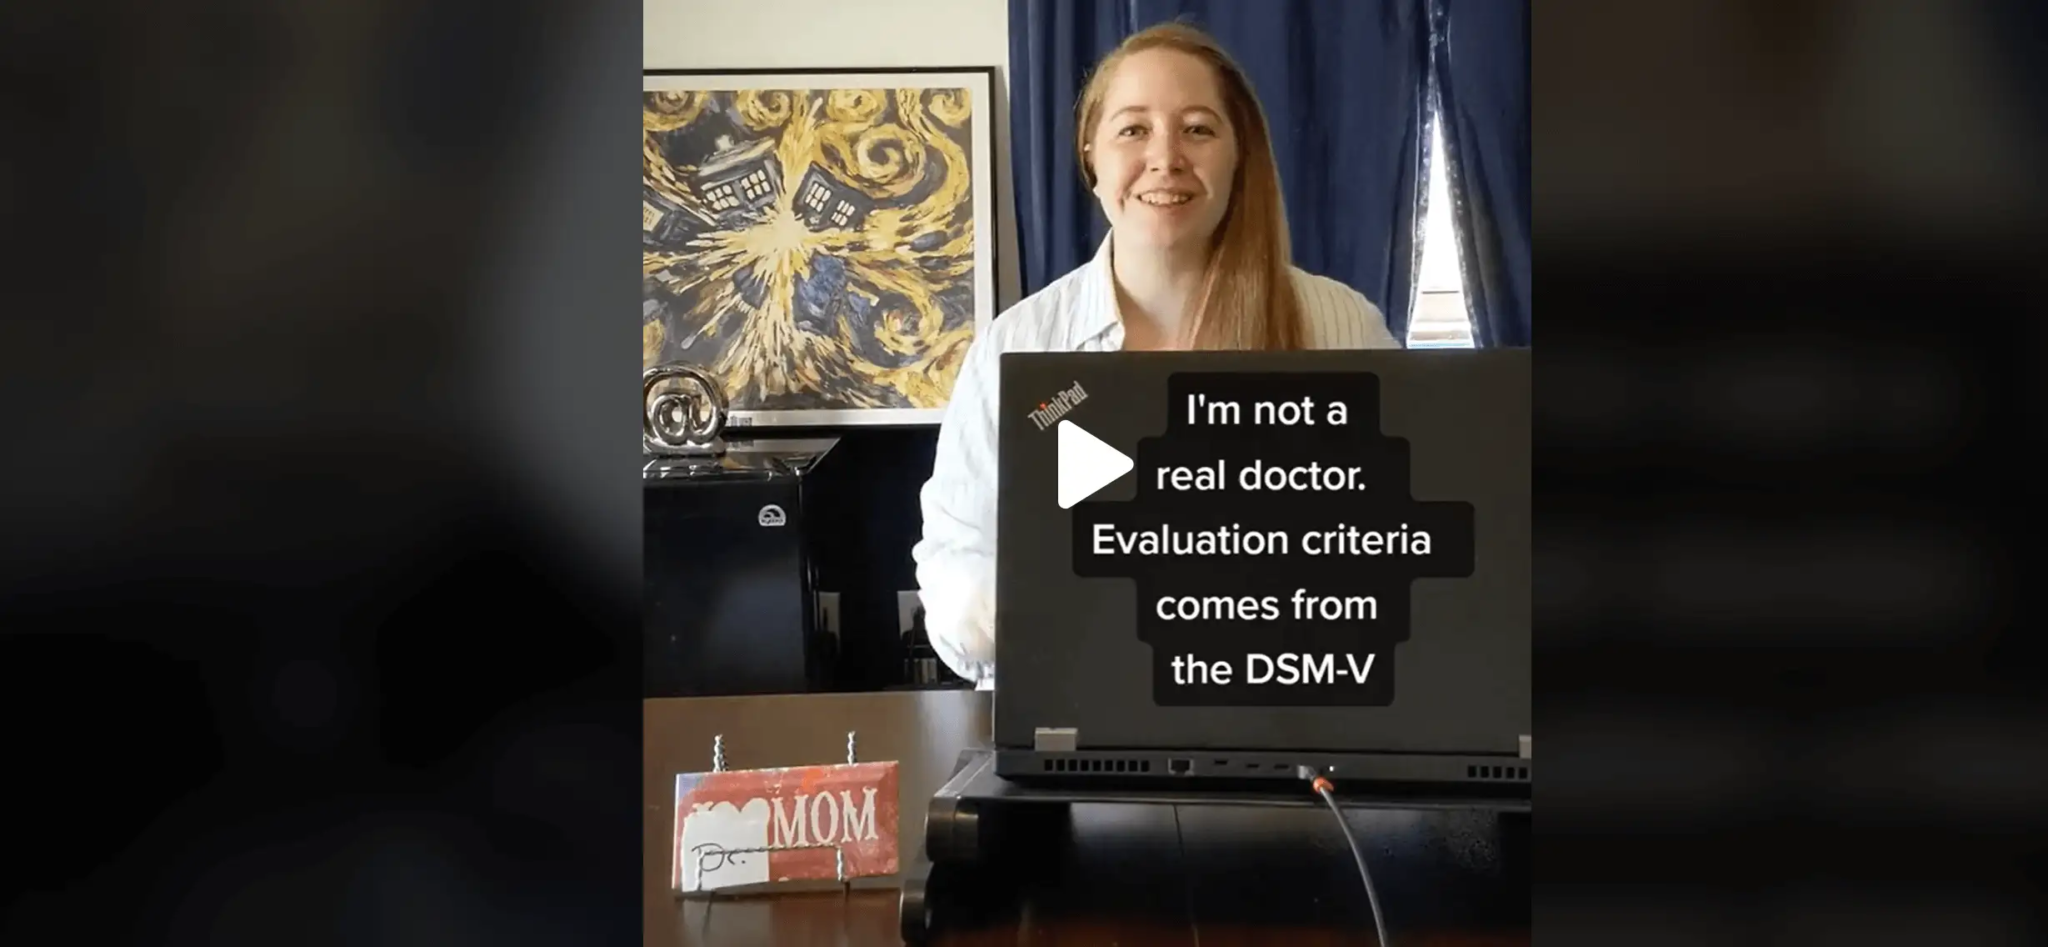 I am not a real doctor. Evaluation criteria comes from the DSM-5